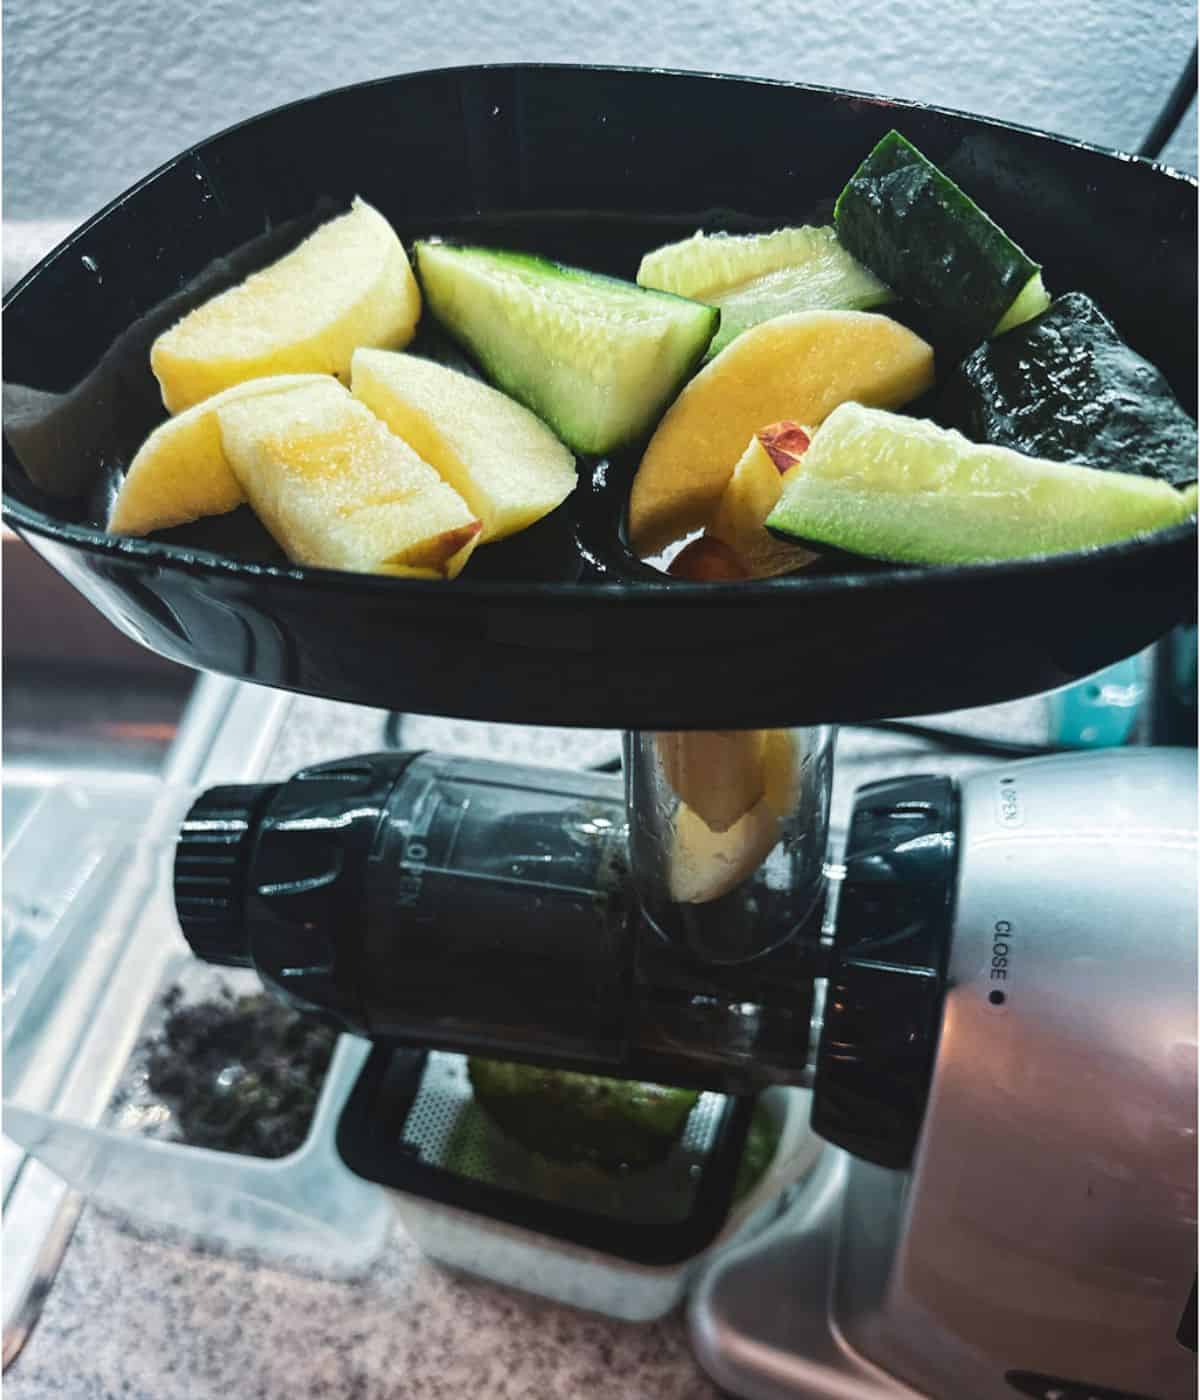 The top view is of a silver and black juicer with apples and cucumbers waiting to be juiced at the top.